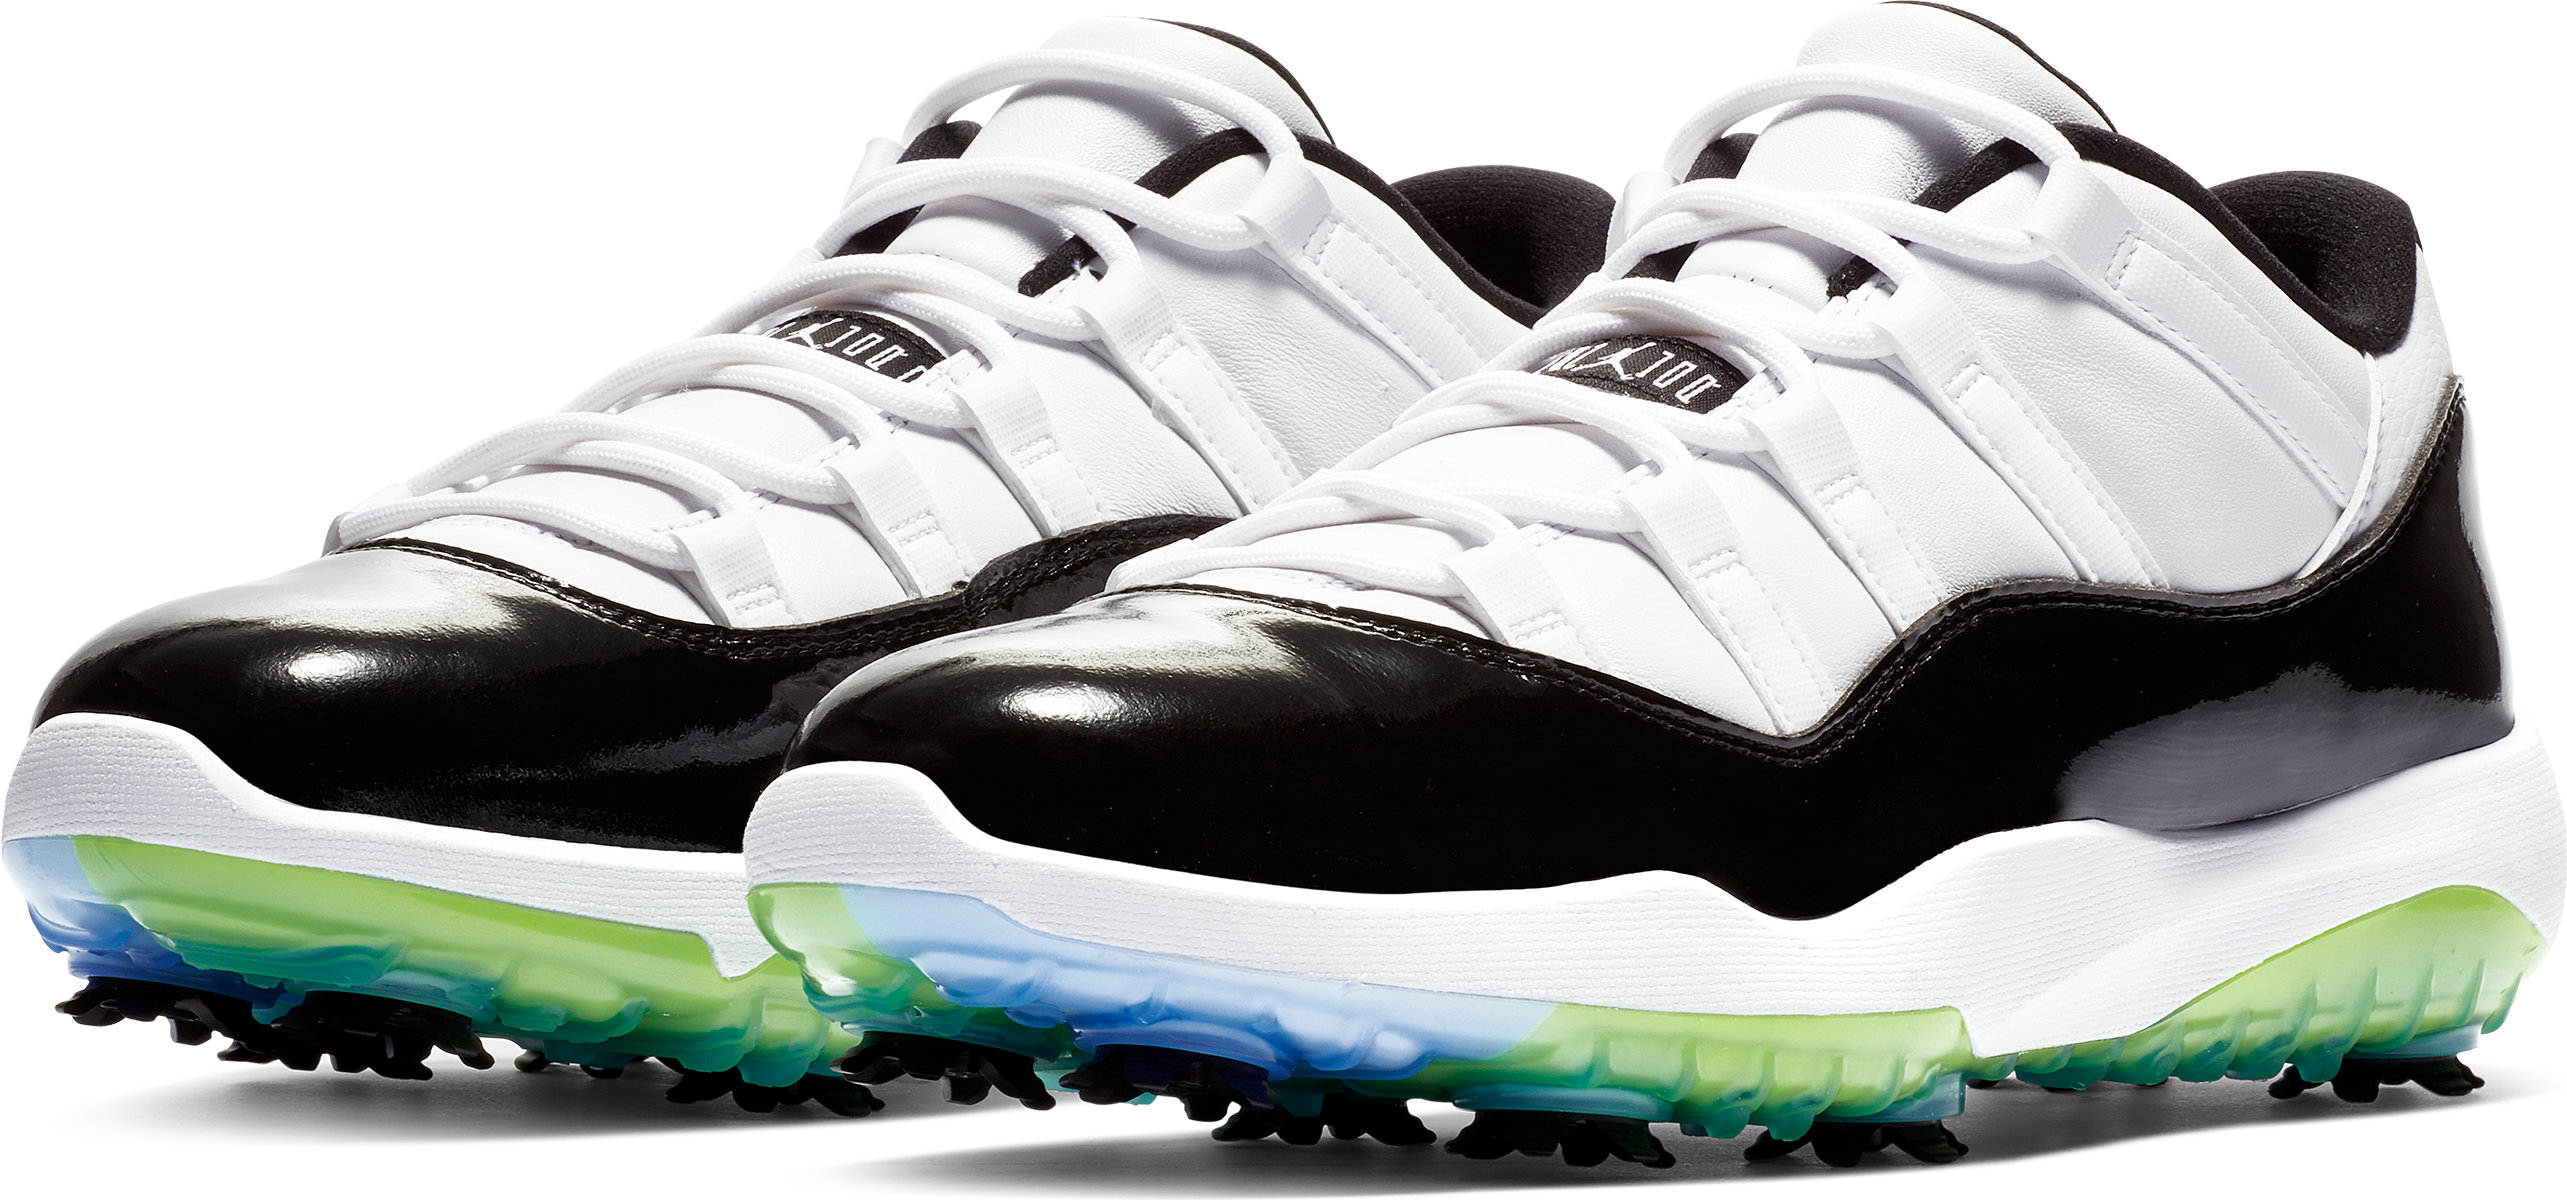 concord golf shoes